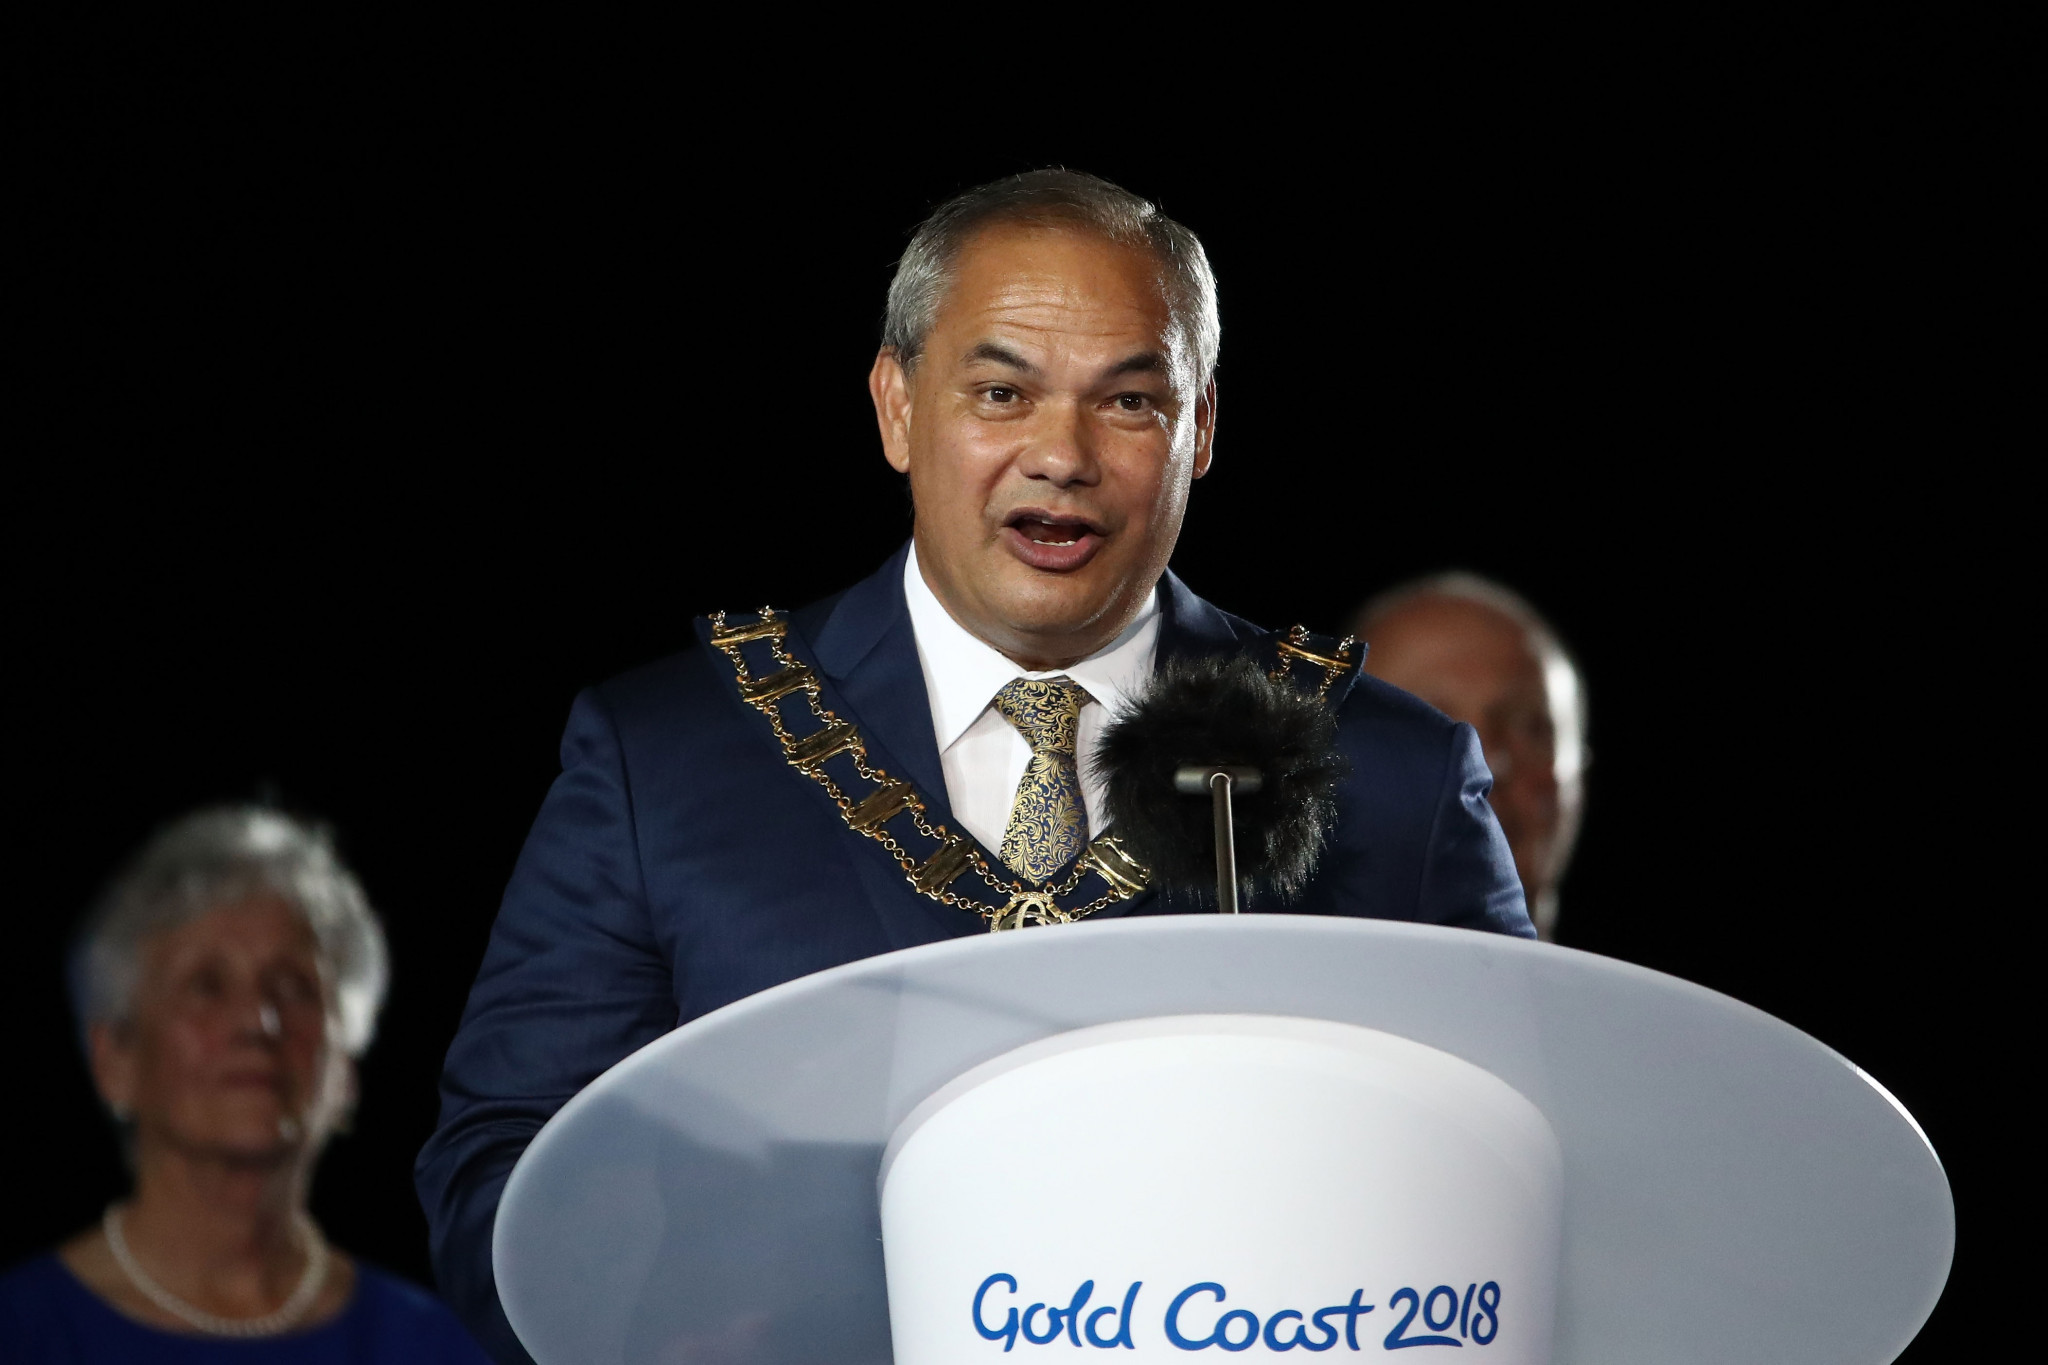 Gold Coast Mayor refusing to give up campaign to host 2026 Commonwealth Games even after opposition from Queensland Premier